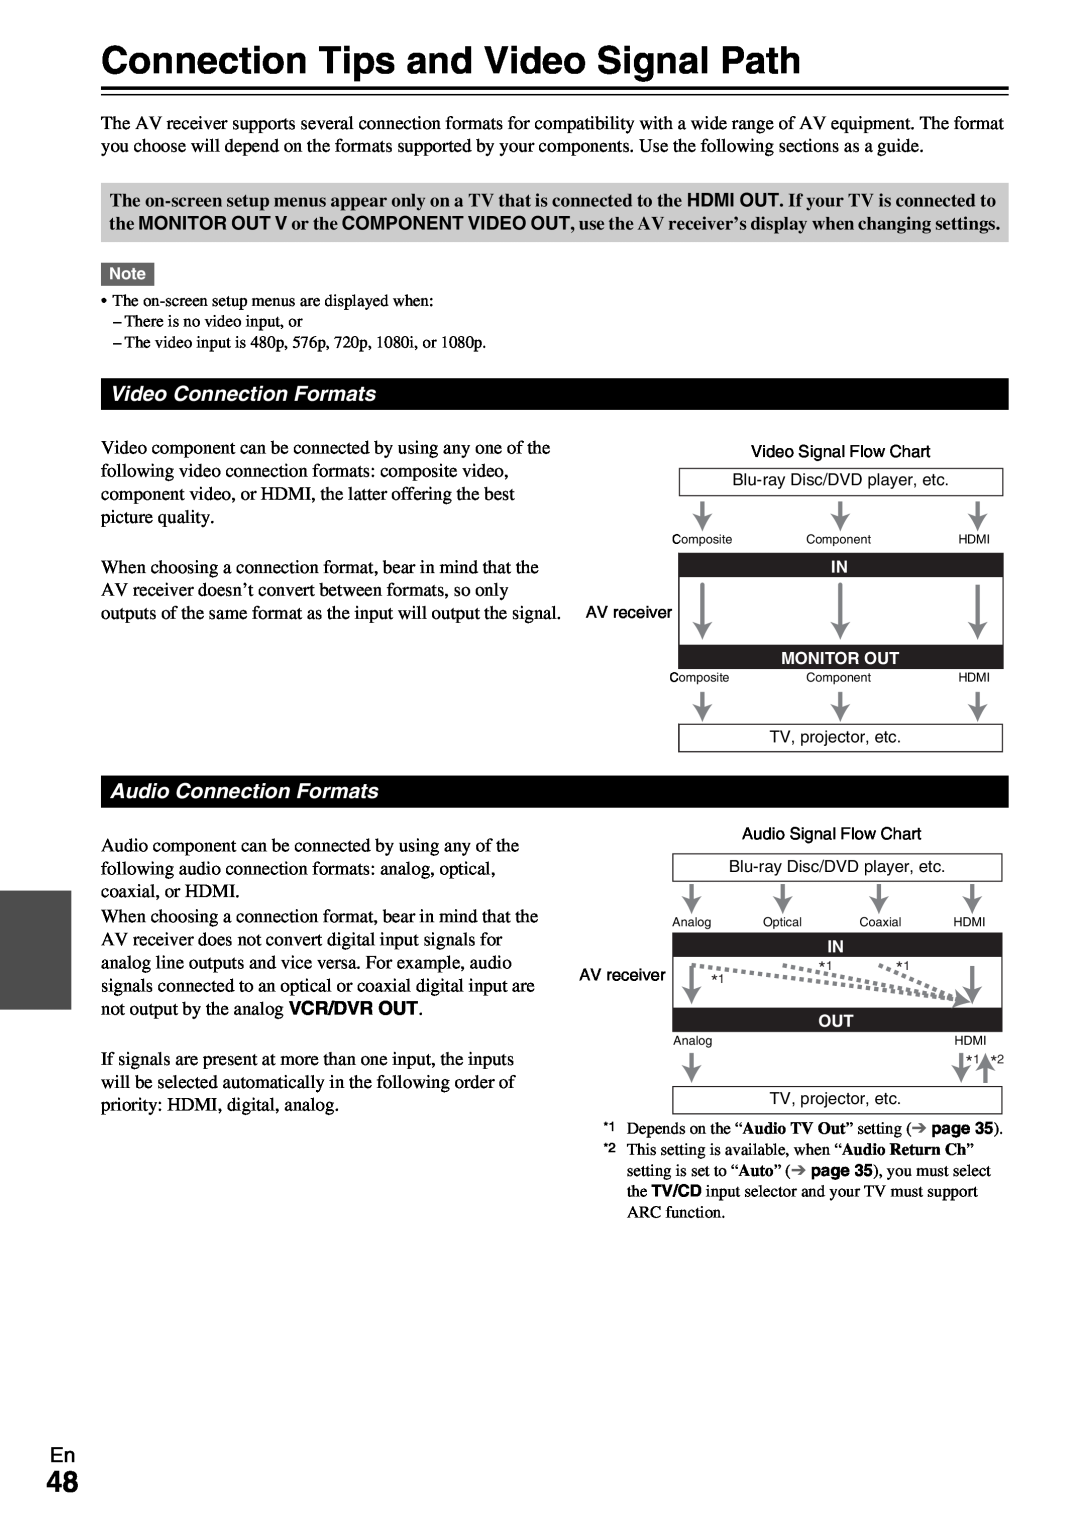 Onkyo HT-R390 instruction manual Connection Tips and Video Signal Path, Video Connection Formats, Audio Connection Formats 